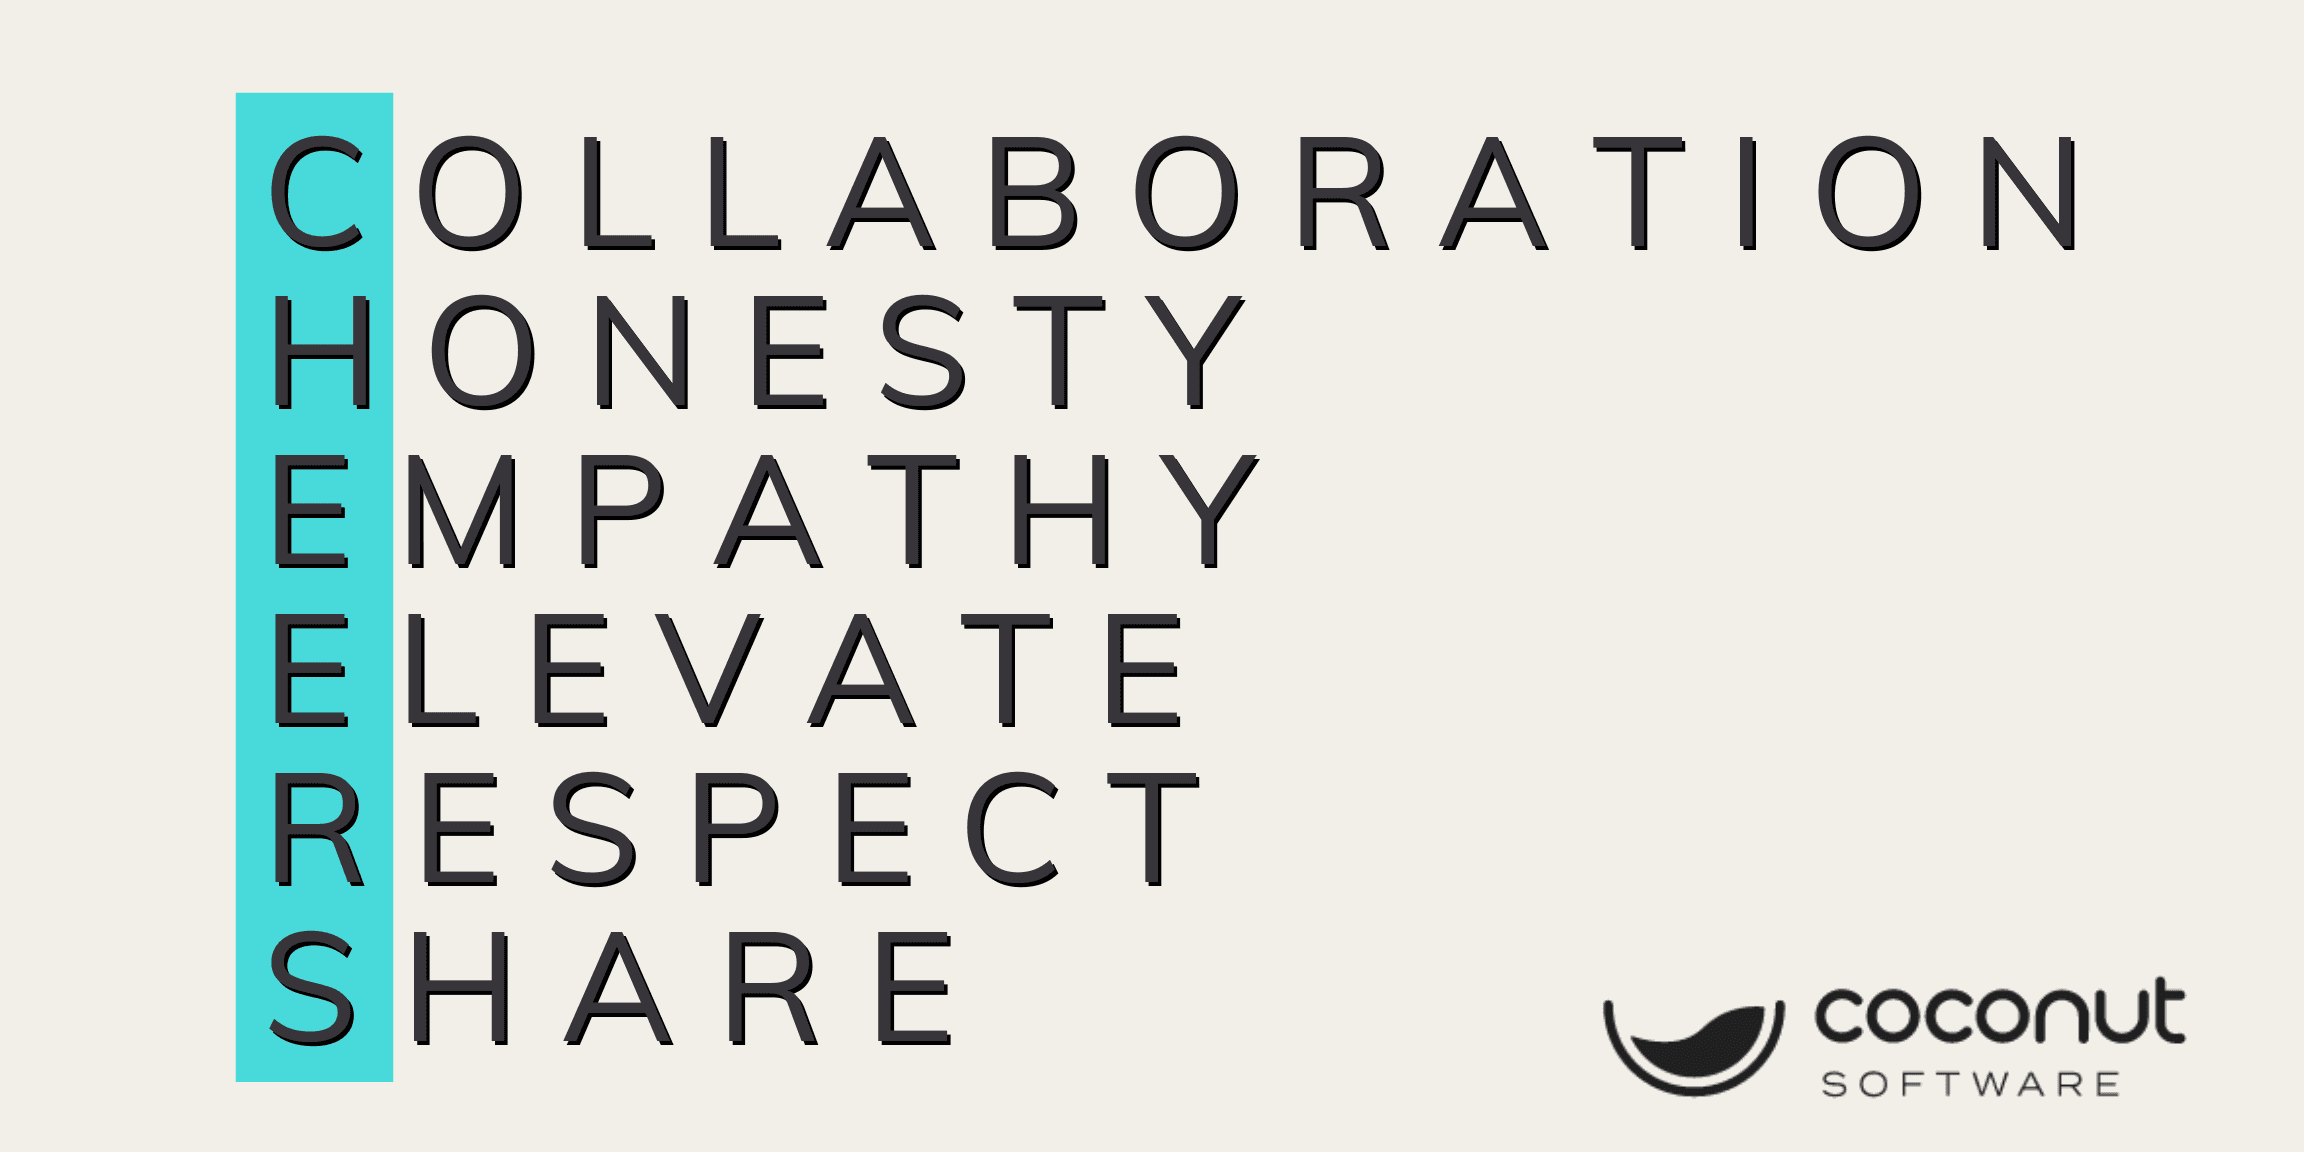 Coconut Software's CHEERS values: Collaboration, Honesty, Empathy, Elevate, Respect, Share, displayed in a vertical and horizontal layout.